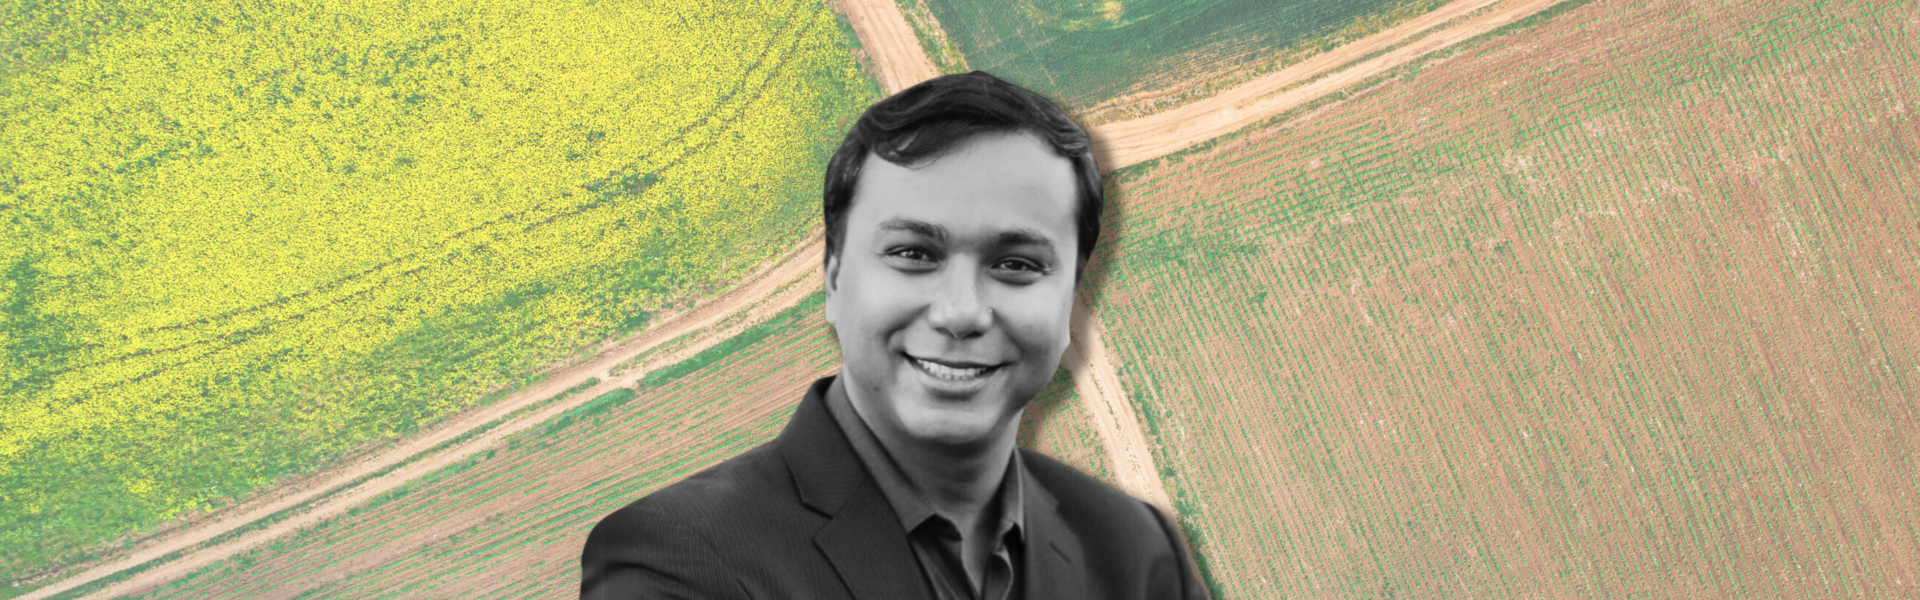 Dr. Asim Biswas pictured over a background of agricultural fields